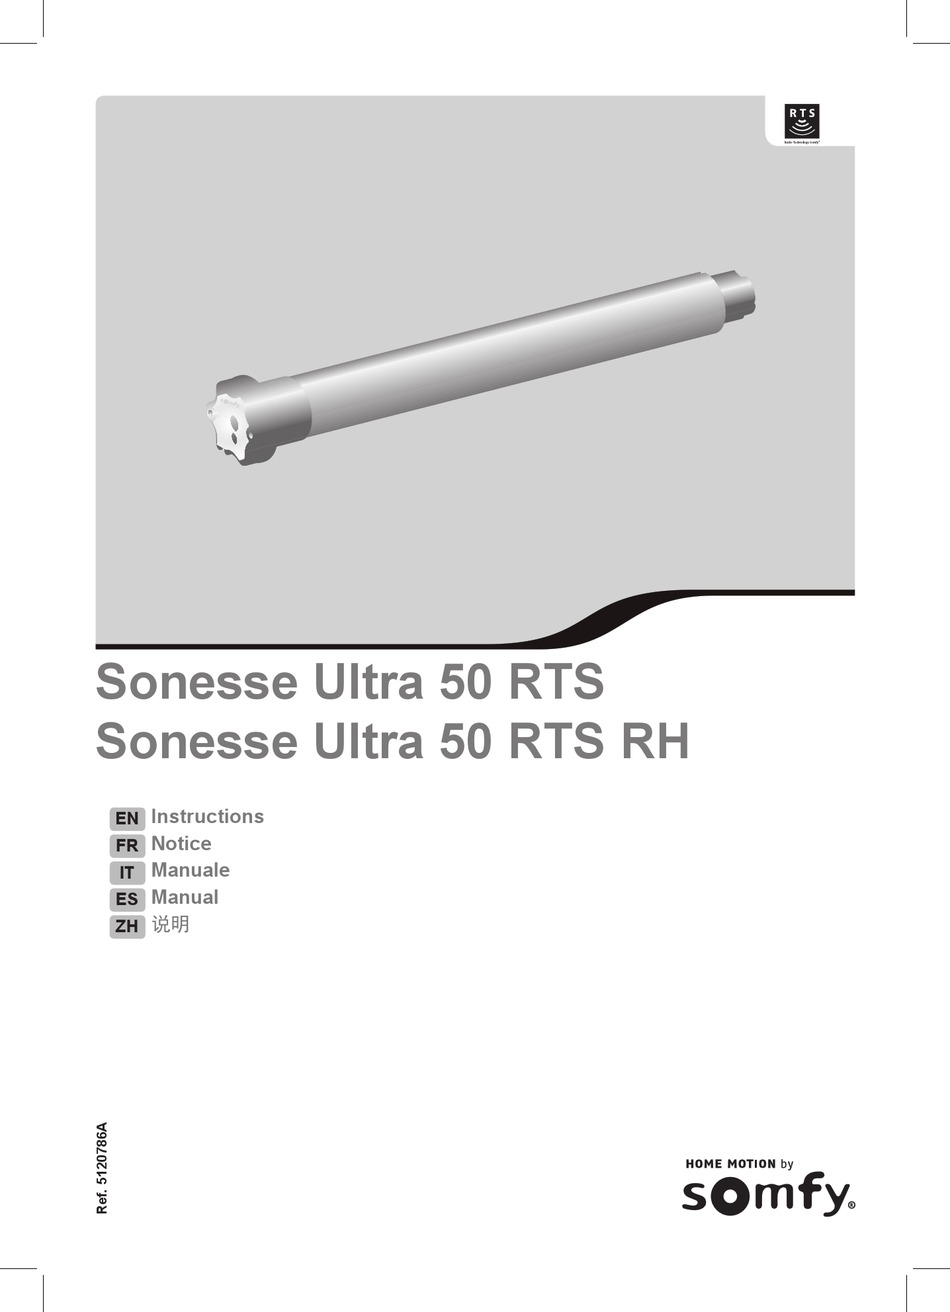 Wiring - SOMFY Sonesse Ultra 50 RTS Instructions Manual [Page 5]